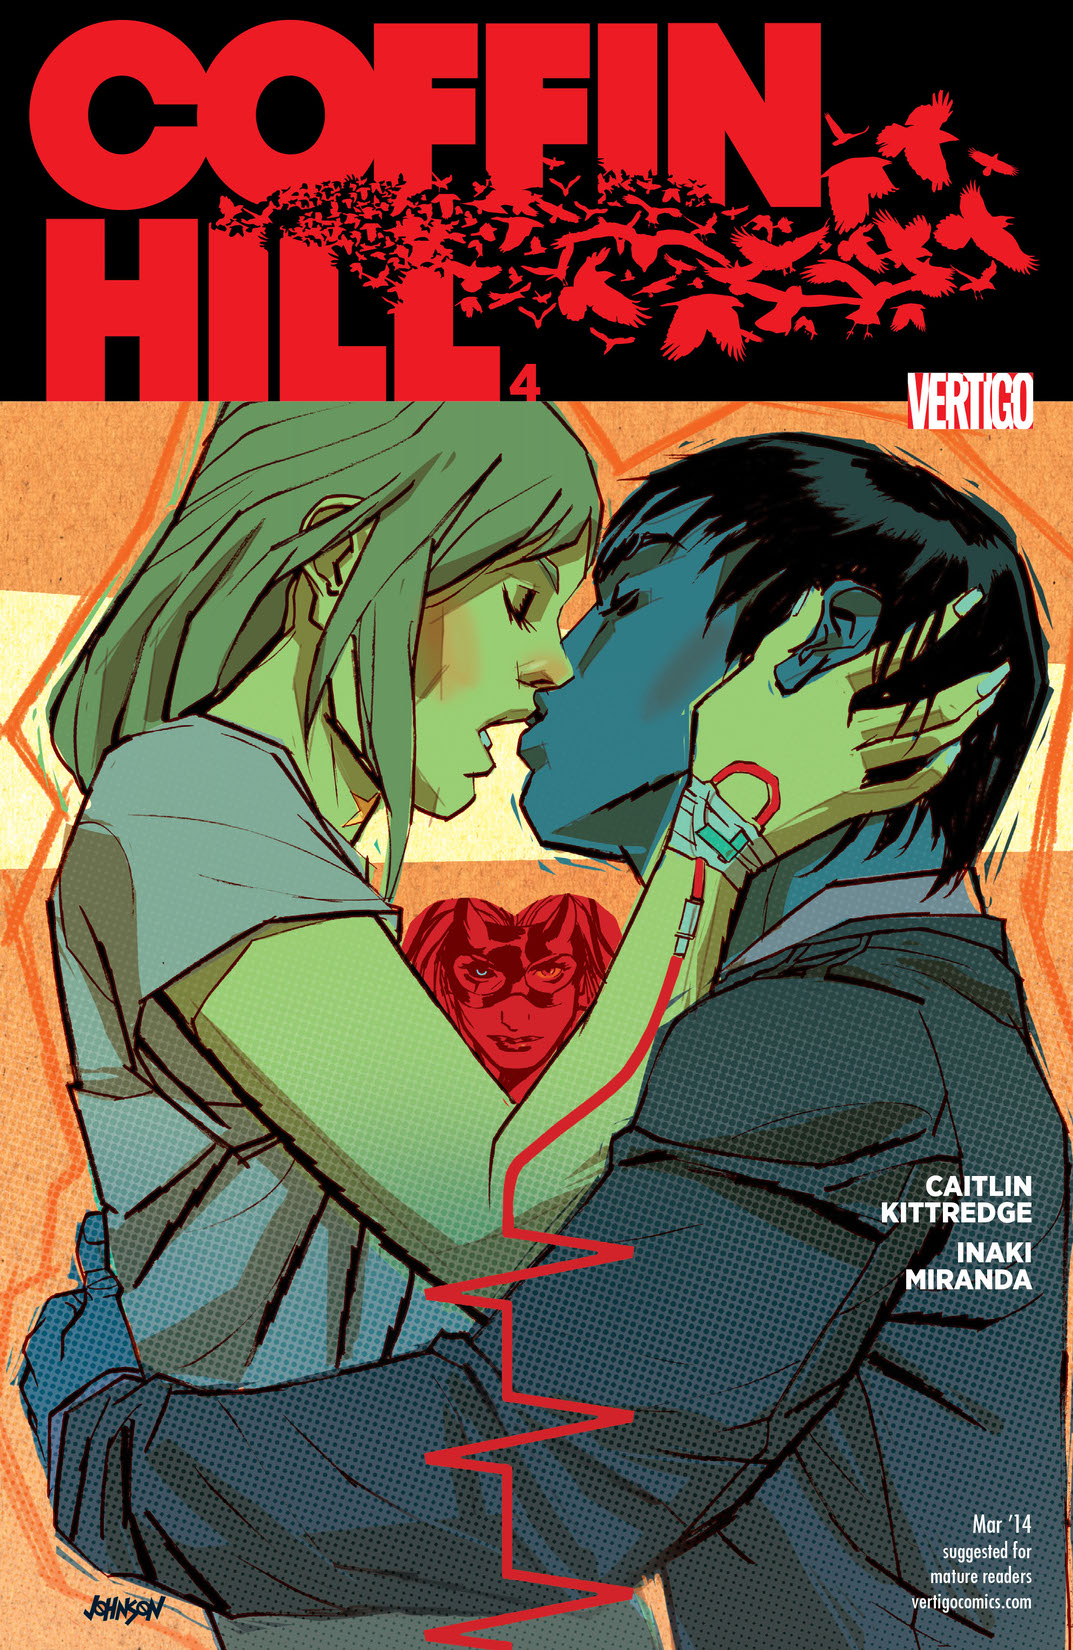 Coffin Hill #4 preview images